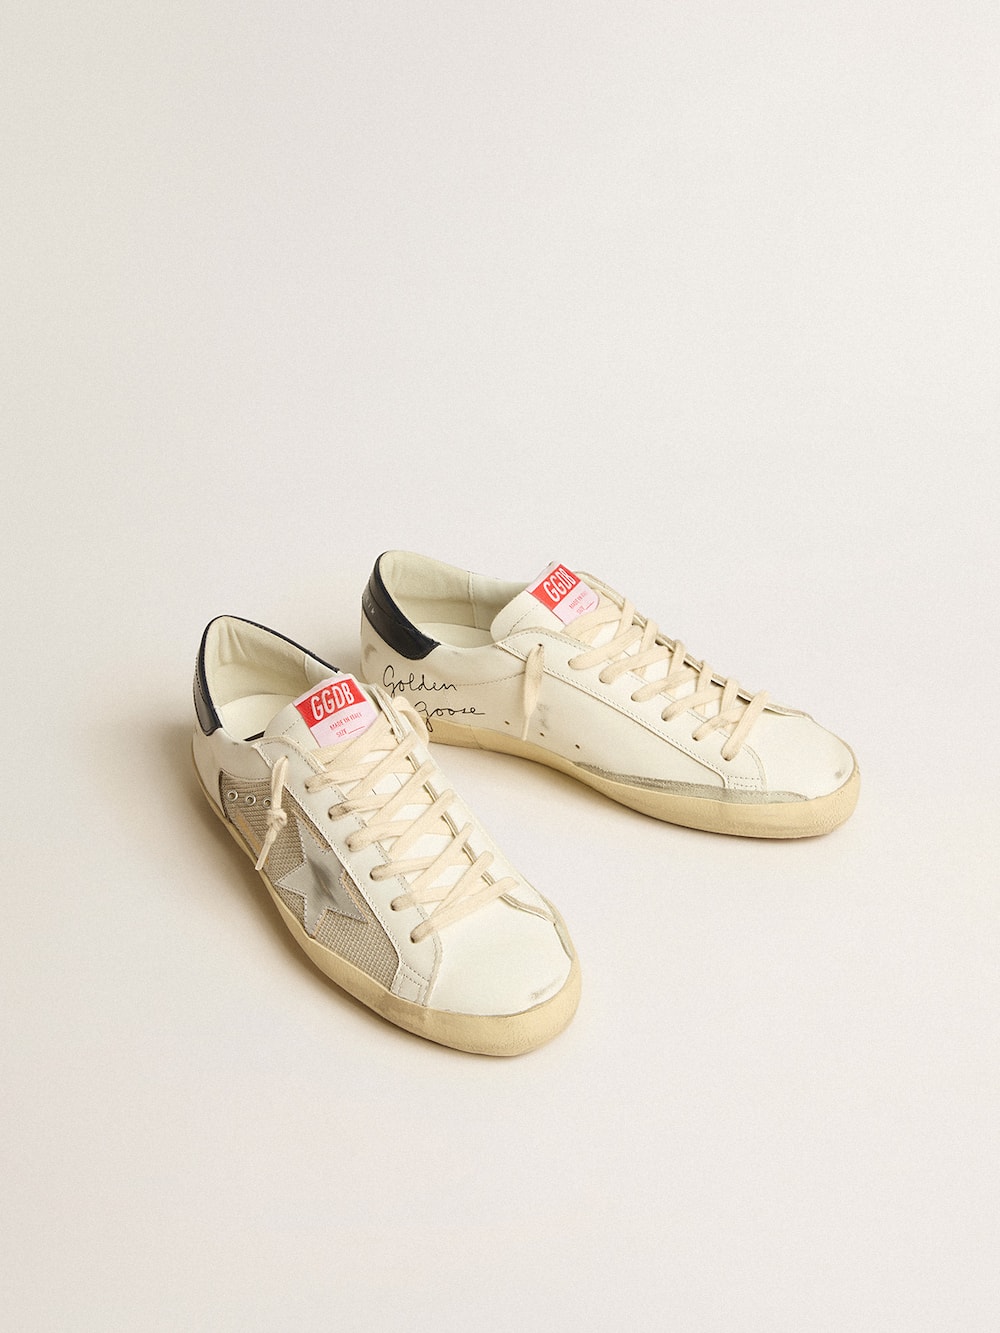 Golden Goose - Men's Super-Star LTD in mesh and leather with silver star and blue heel tab in 